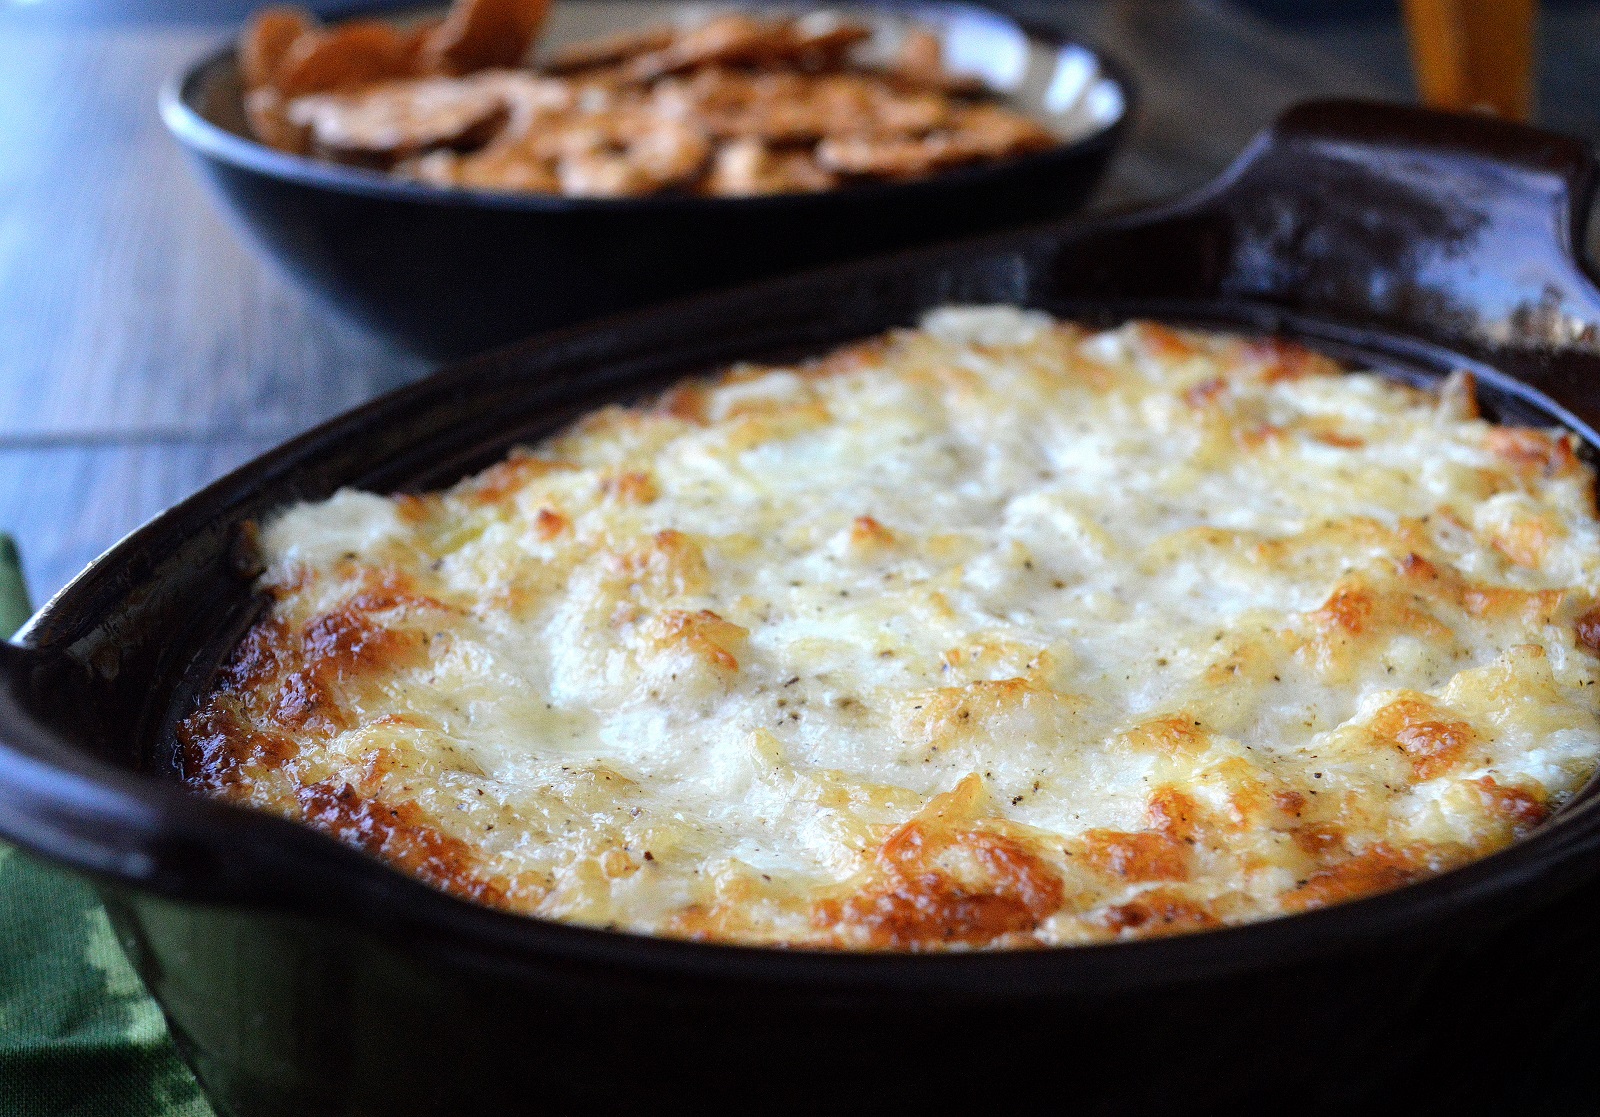 The BEST Hot Onion Dip recipe, just 5 ingredients